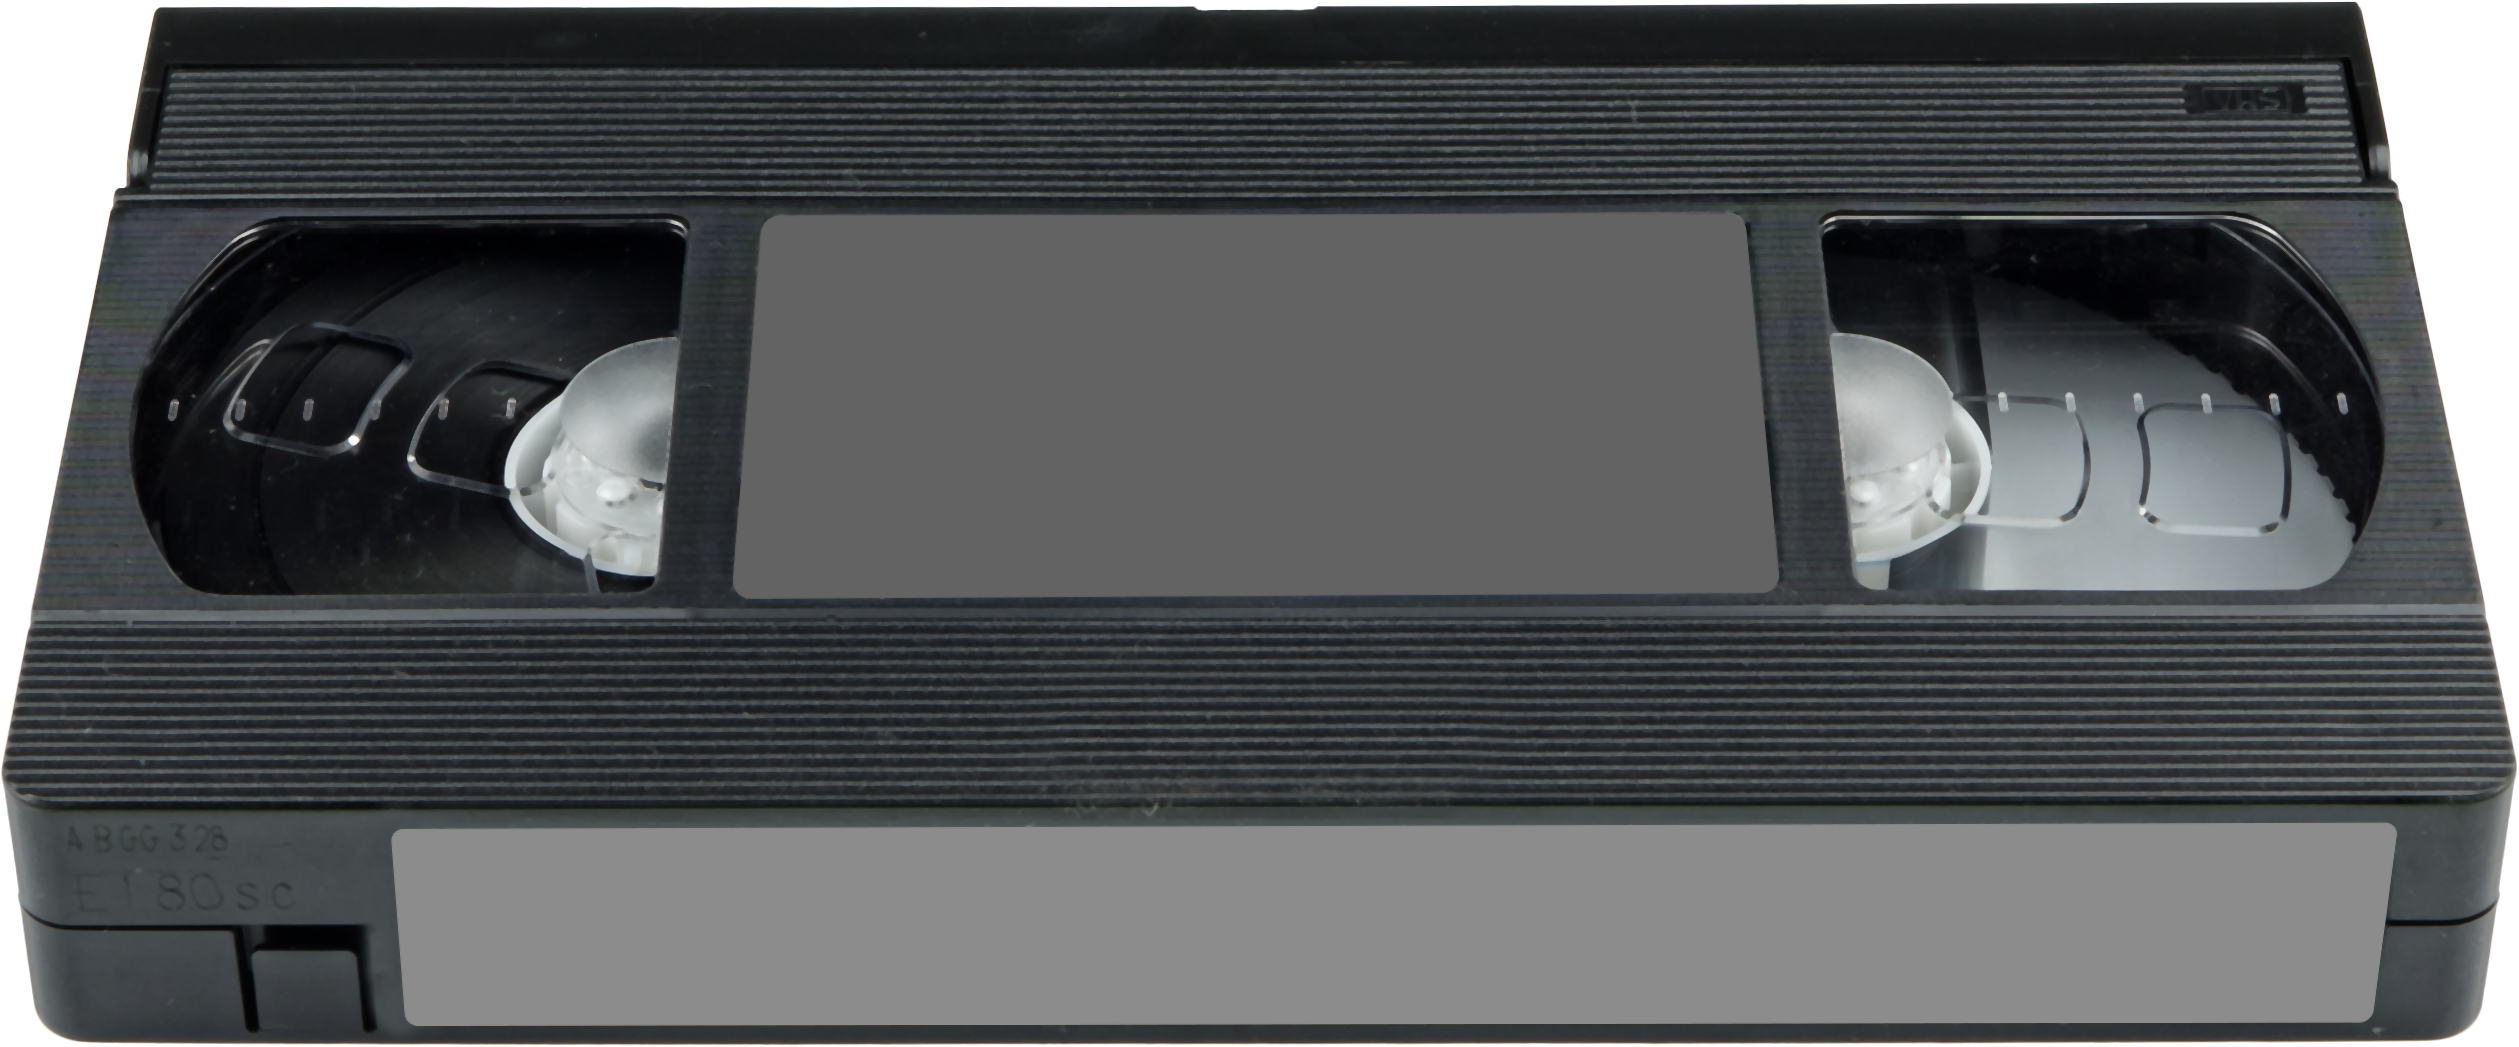 Vhs Tape Png Transparent Vhs Tapepng Images Pluspng